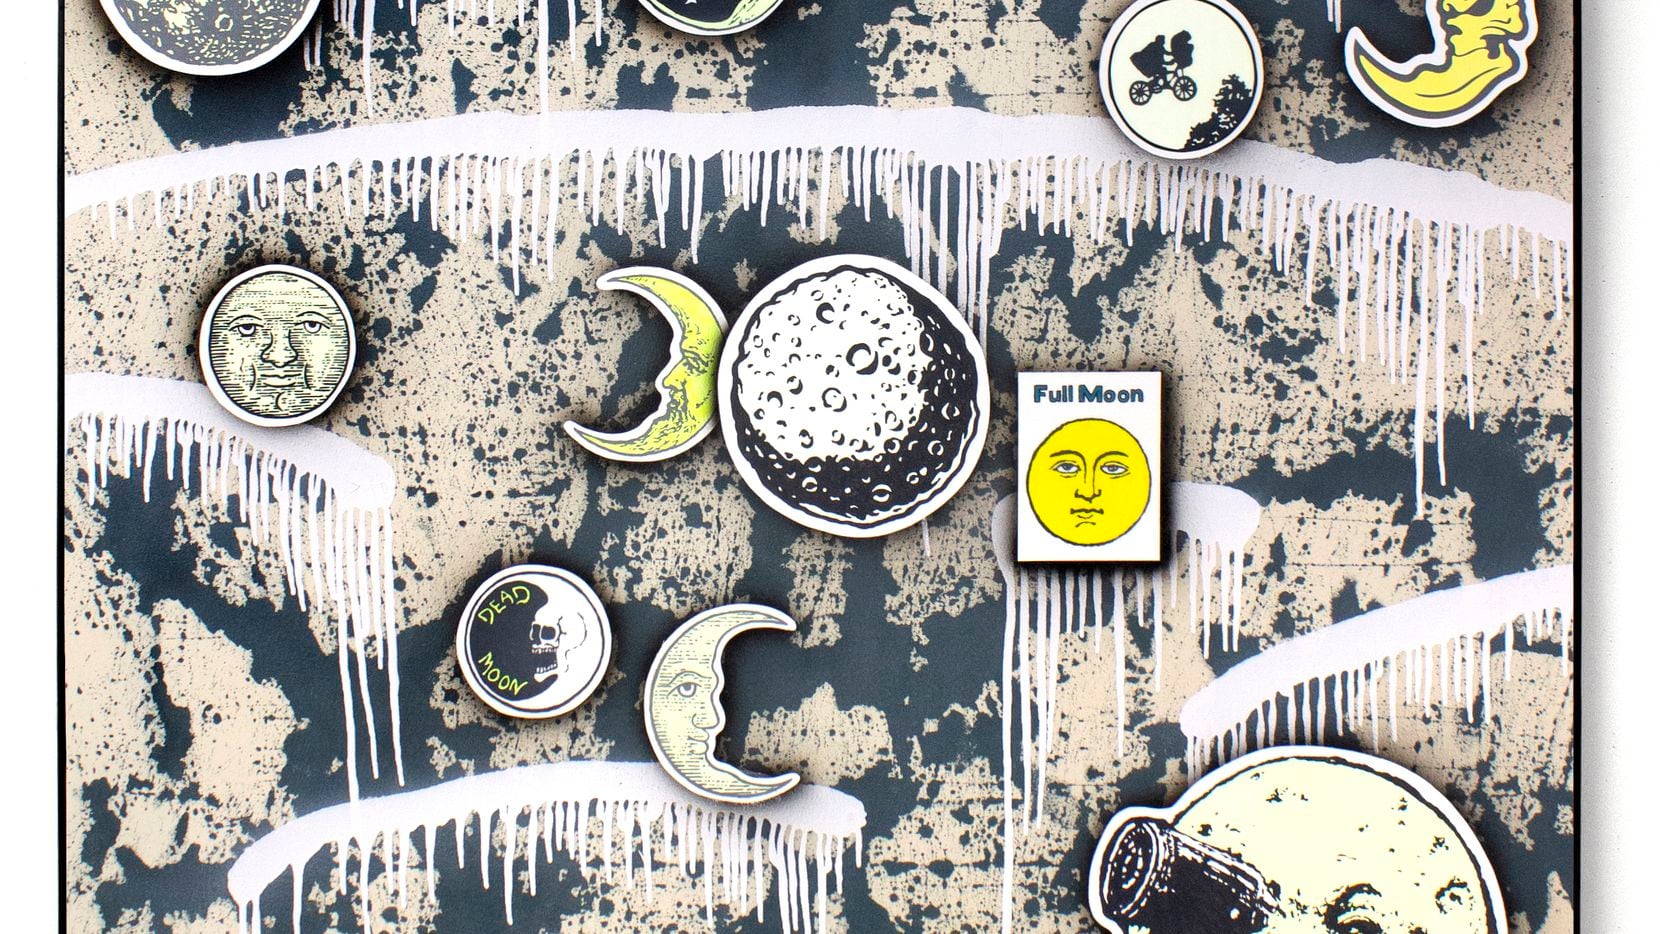 Josh Reames' "Many moons," a 2021 oil-and-acrylic-on-canvas painting, is among the works on...